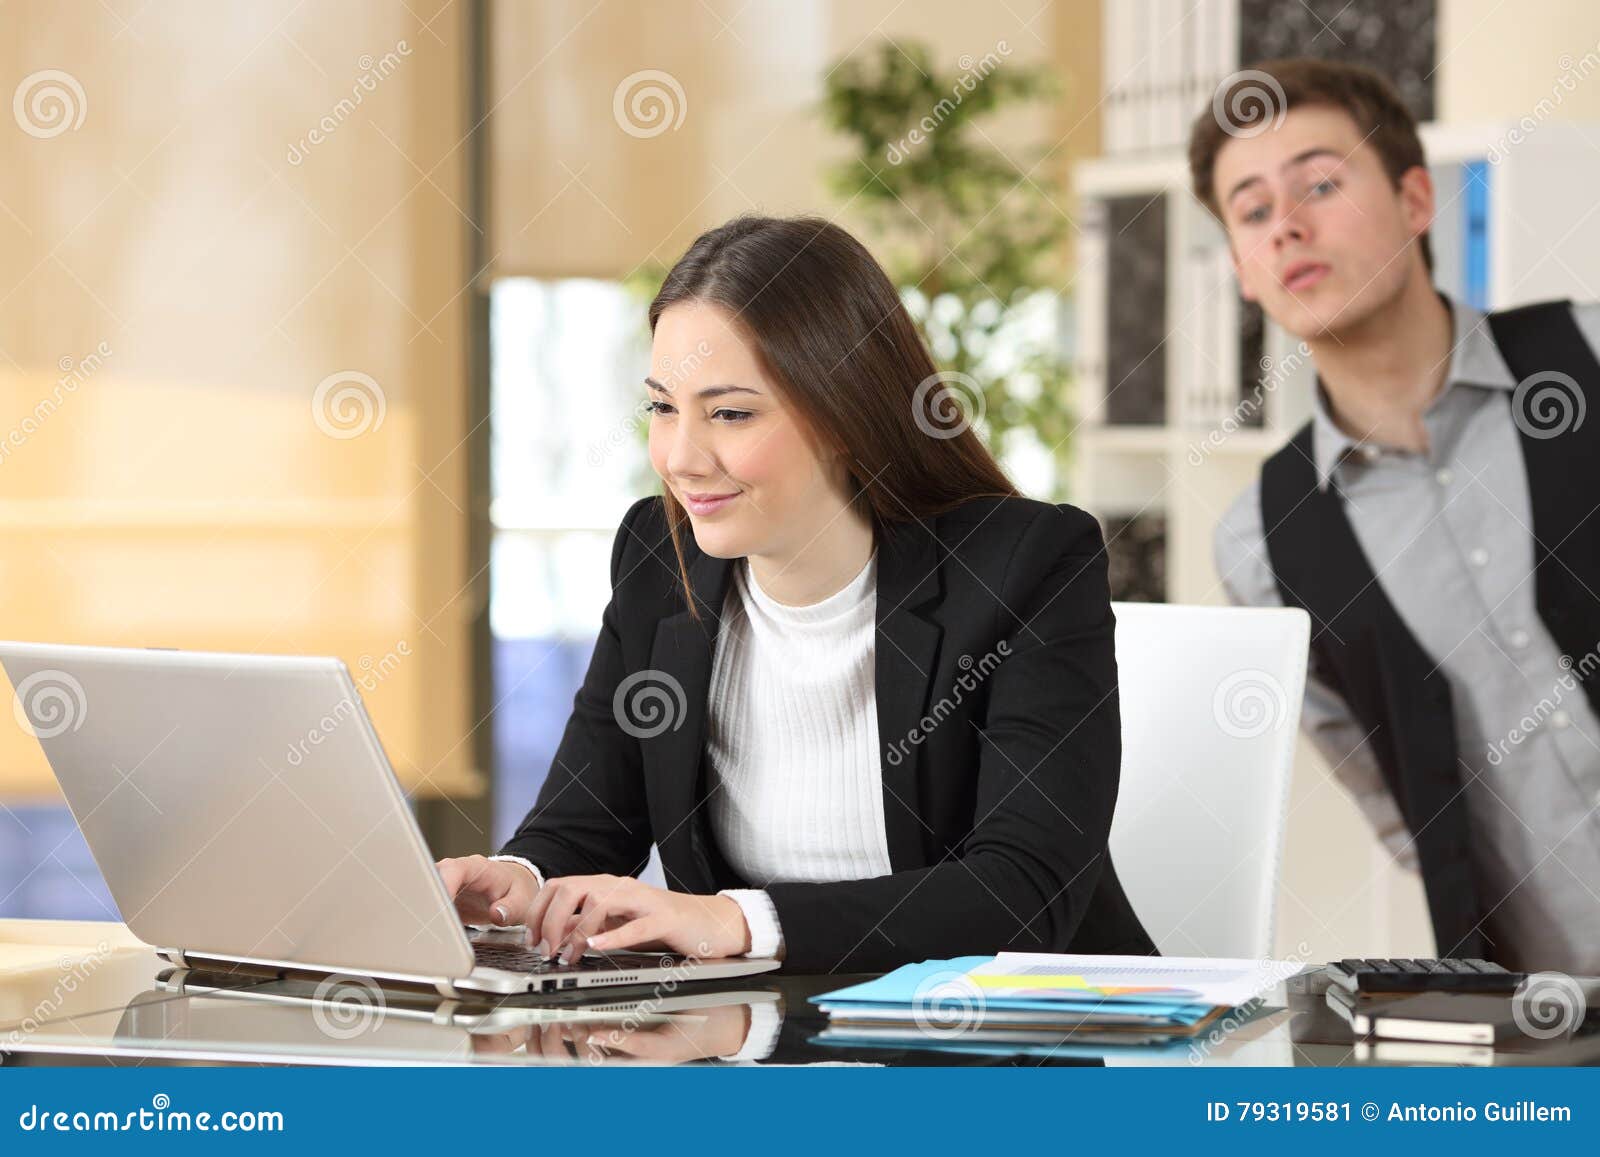 businessman spying his colleague at job